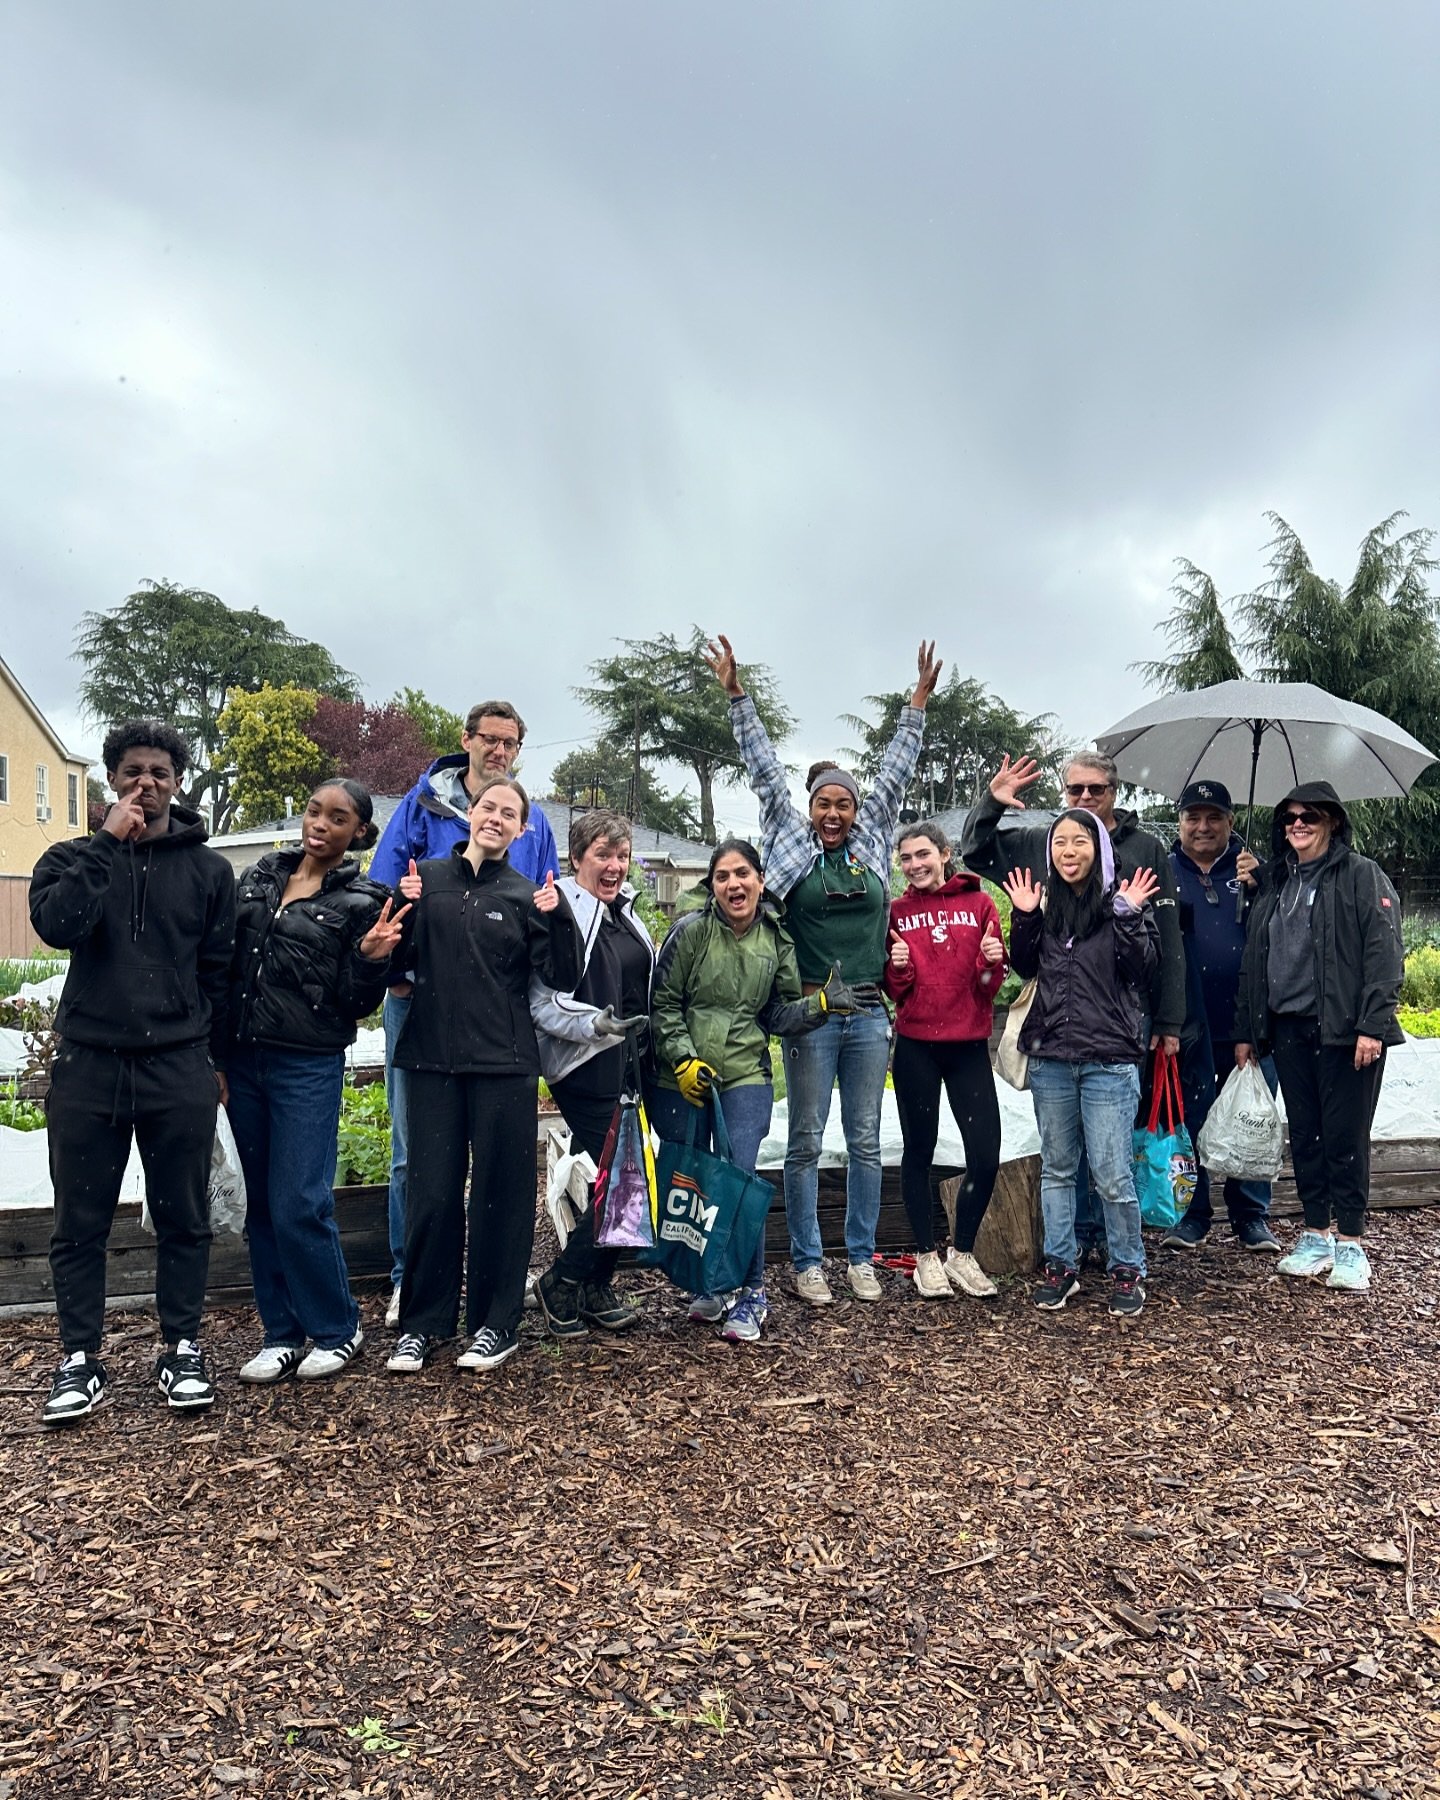 Shoutout to @amhsmonarchs Parent Association for coming to volunteer at the farm 👏🏽🦁🌱 we love hosting group and organizations for volunteer days. Email us if you have a crew that would like to come and get their hands dirty! 

#volunteer #groupac